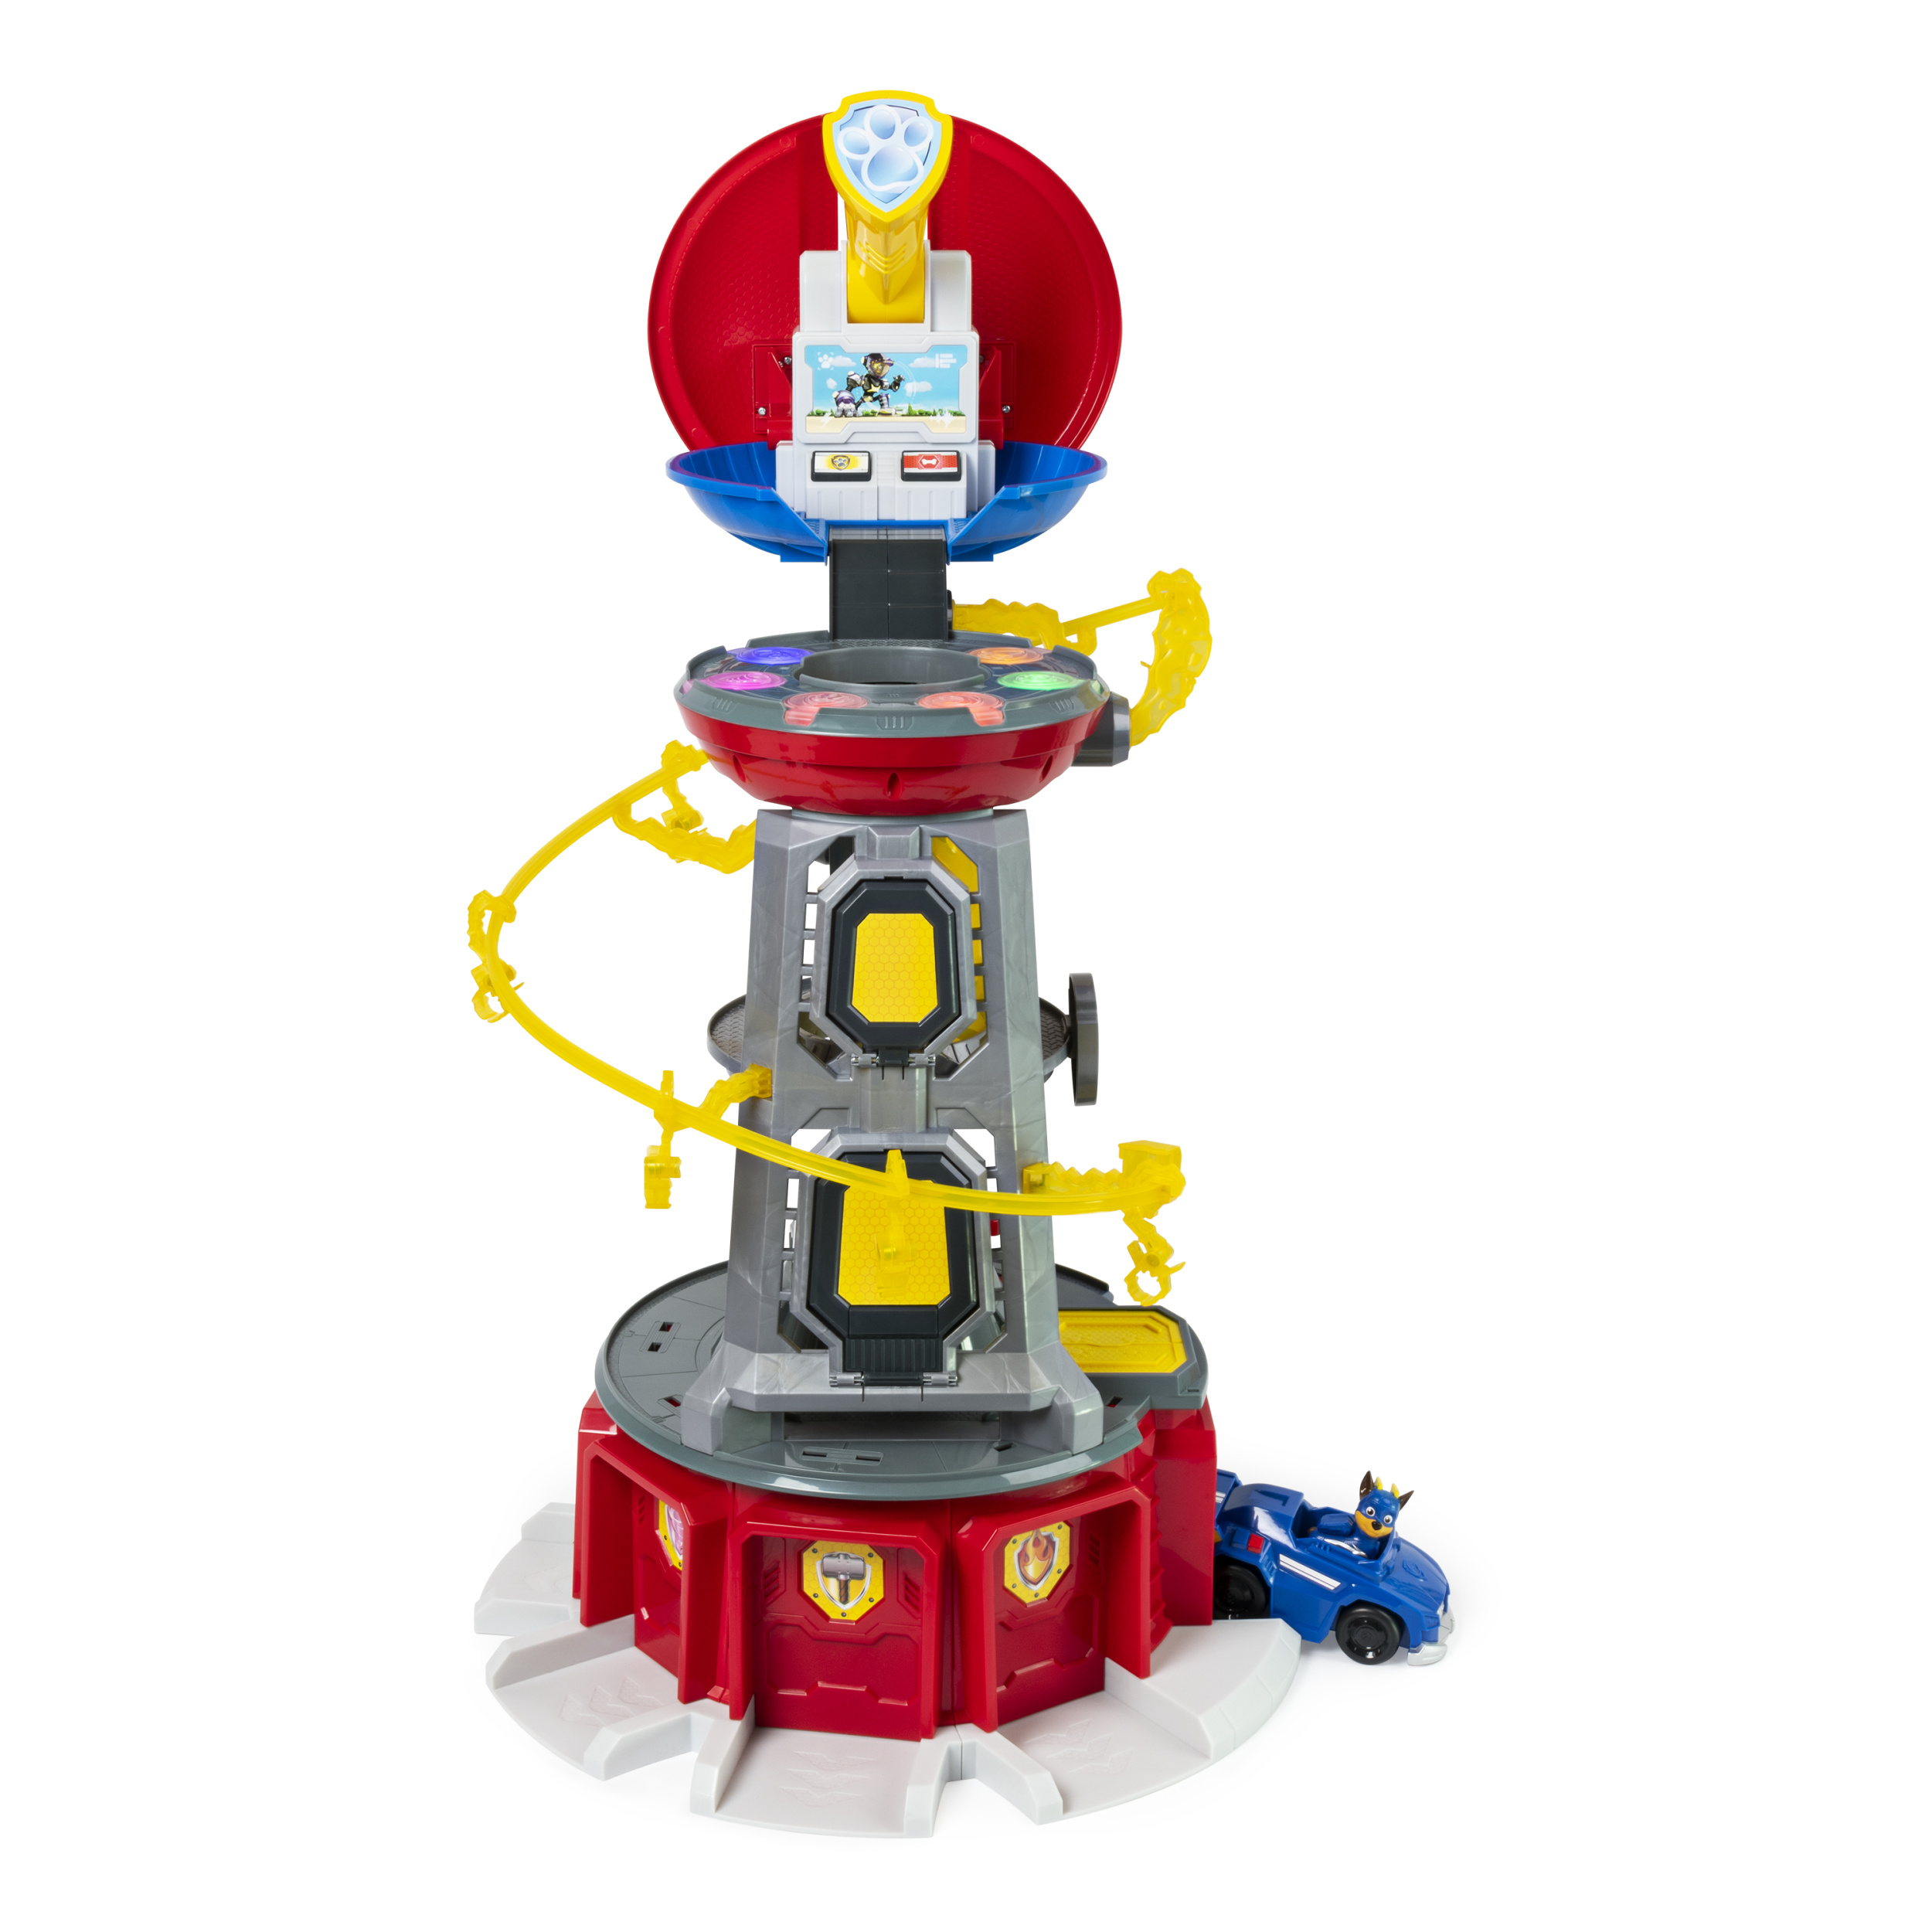 PAW Patrol, Mighty Pups Super PAWs Lookout Tower Playset with Lights and Sounds, Toy for Ages 3 and Up - image 1 of 8